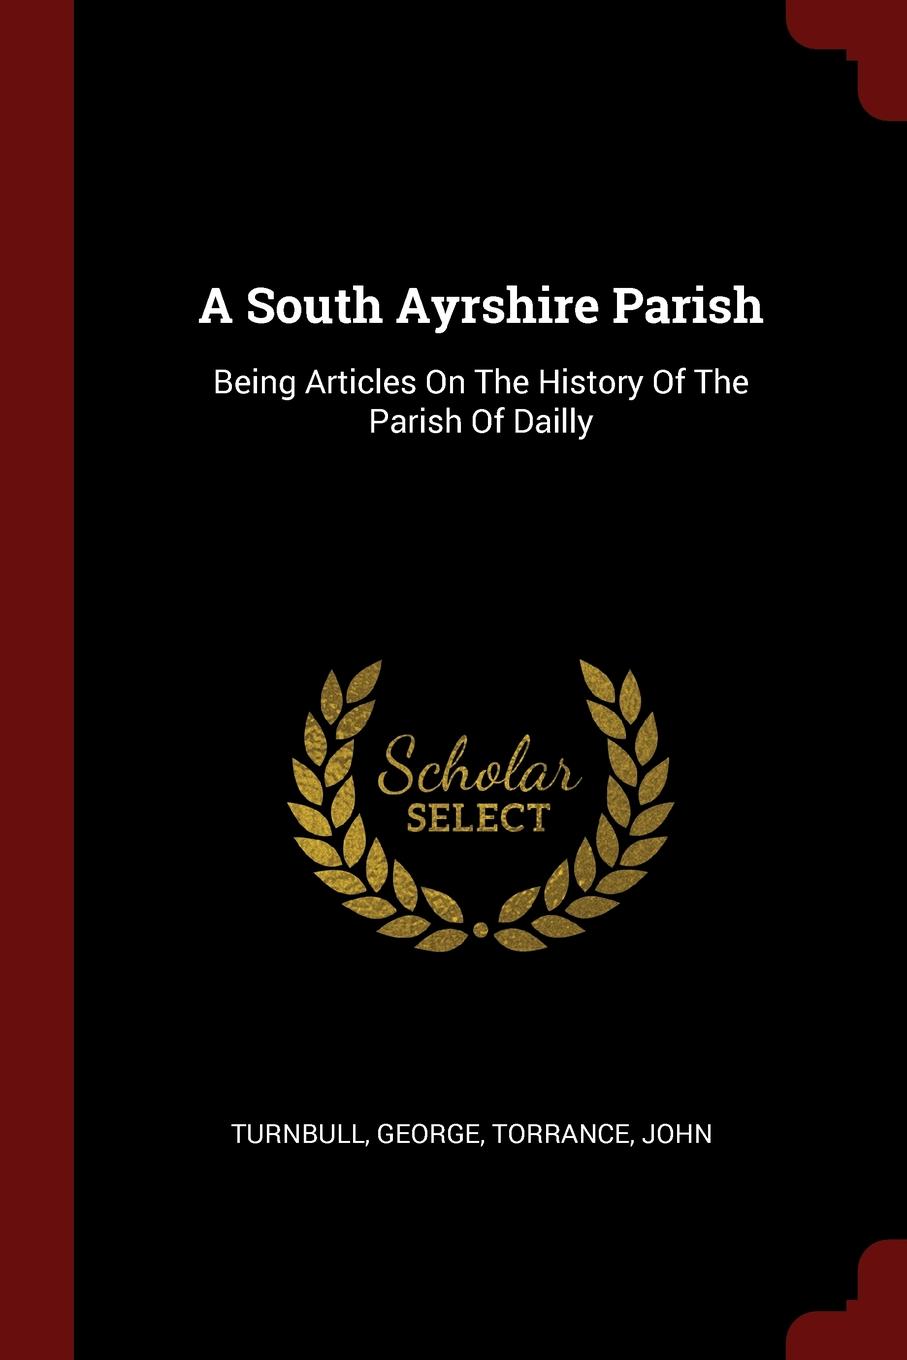 A South Ayrshire Parish. Being Articles On The History Of The Parish Of Dailly